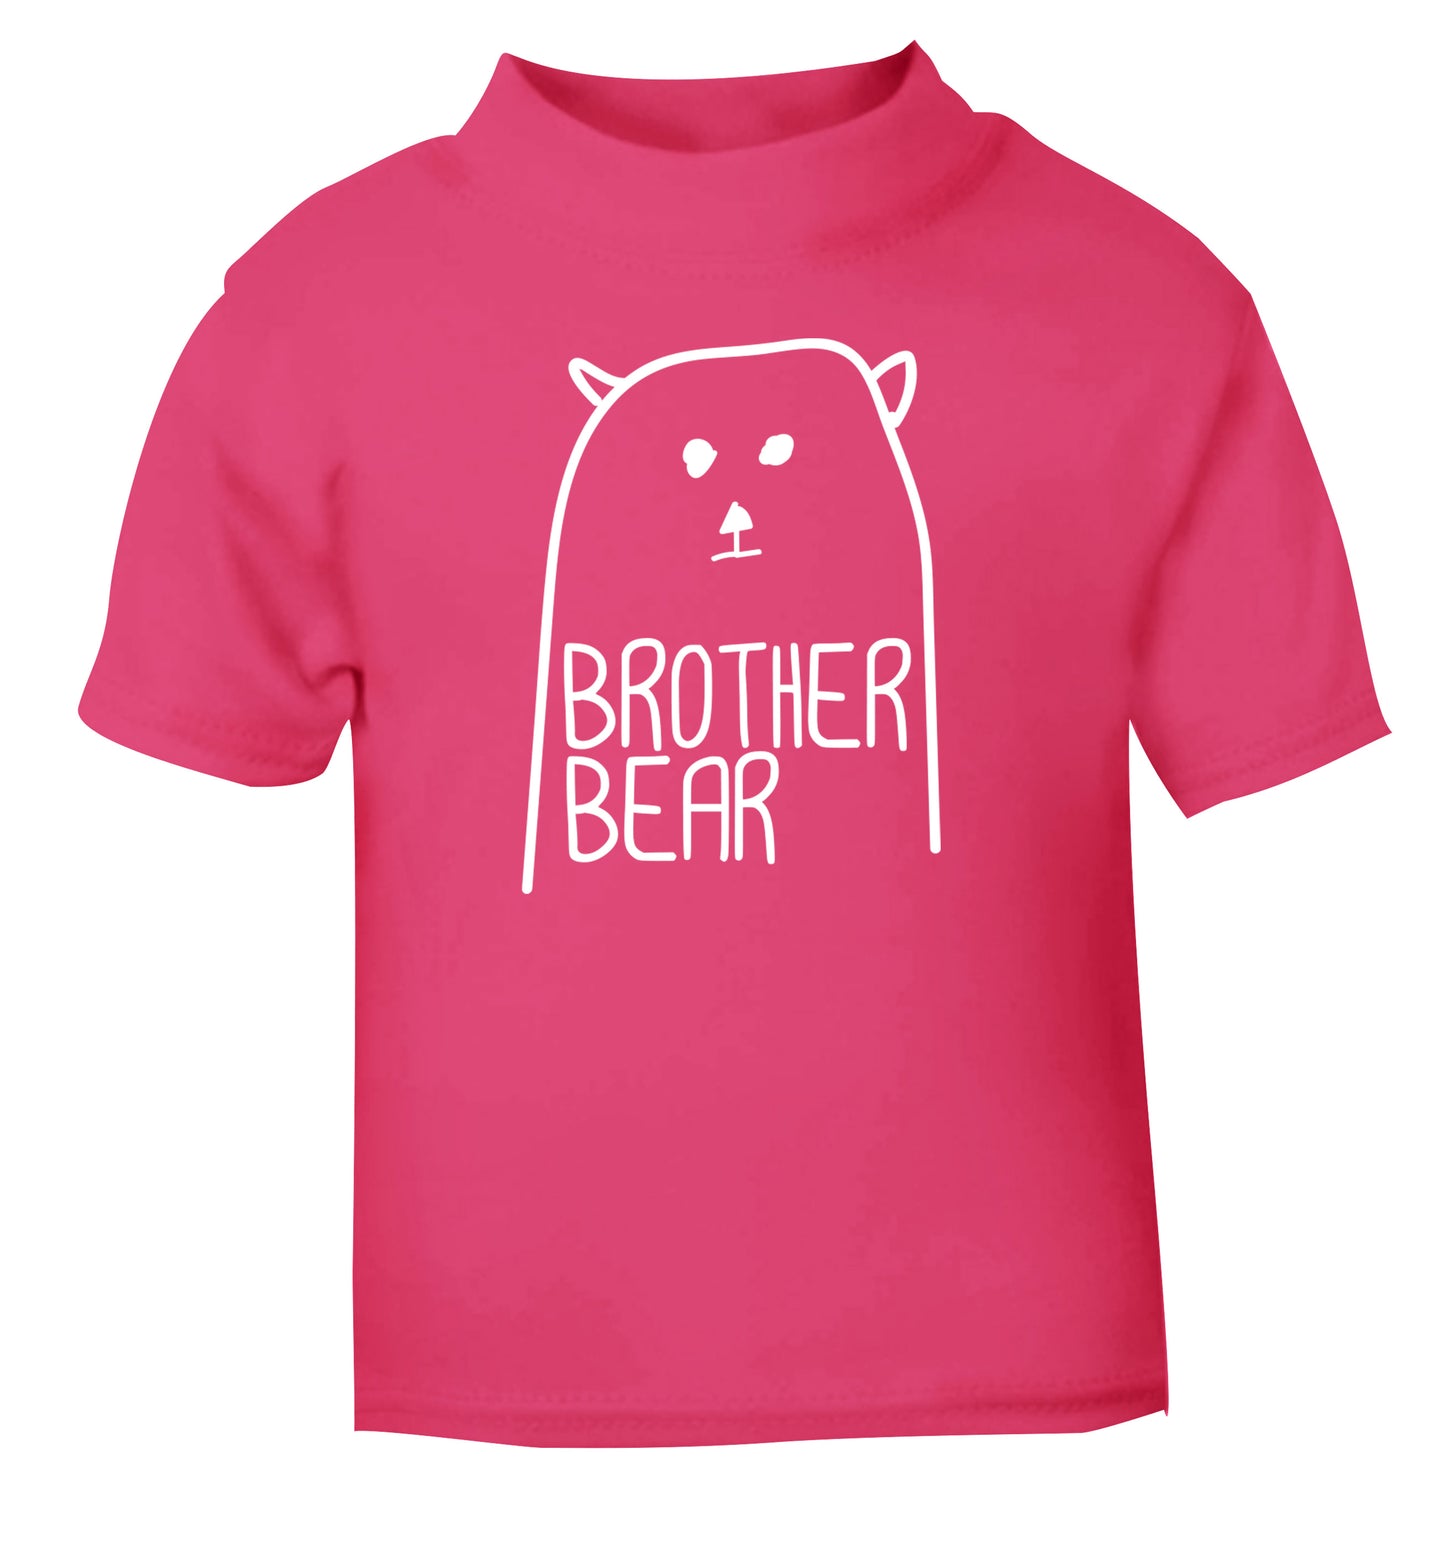 Brother bear pink Baby Toddler Tshirt 2 Years